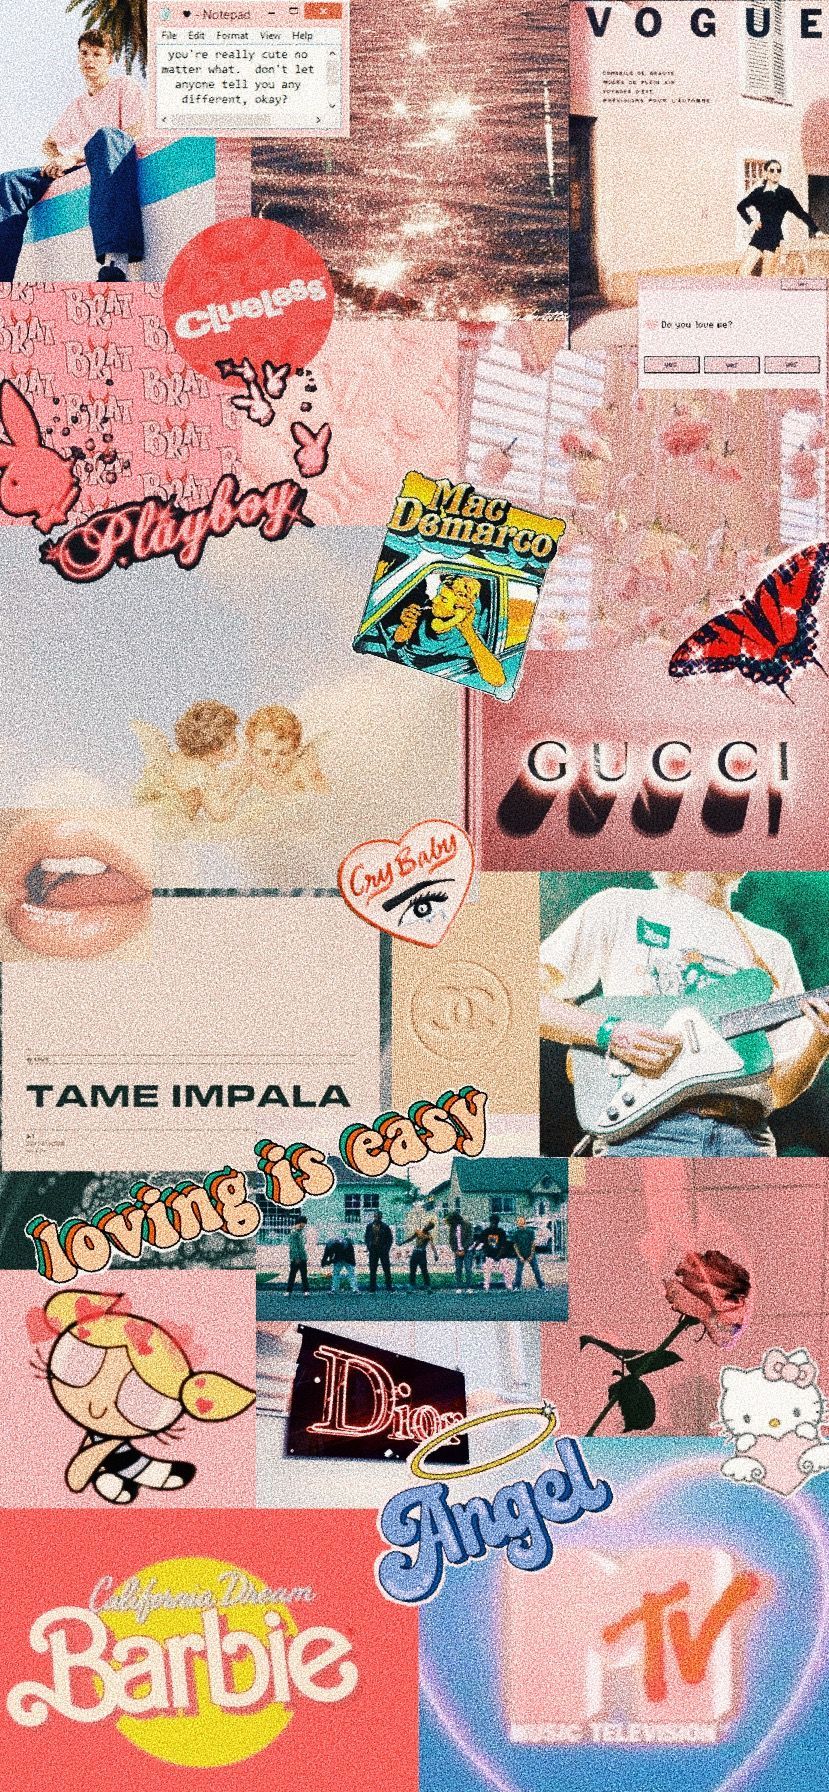 retro vintage aesthetic collage wallpaper iphone x xr xs iPhone 10